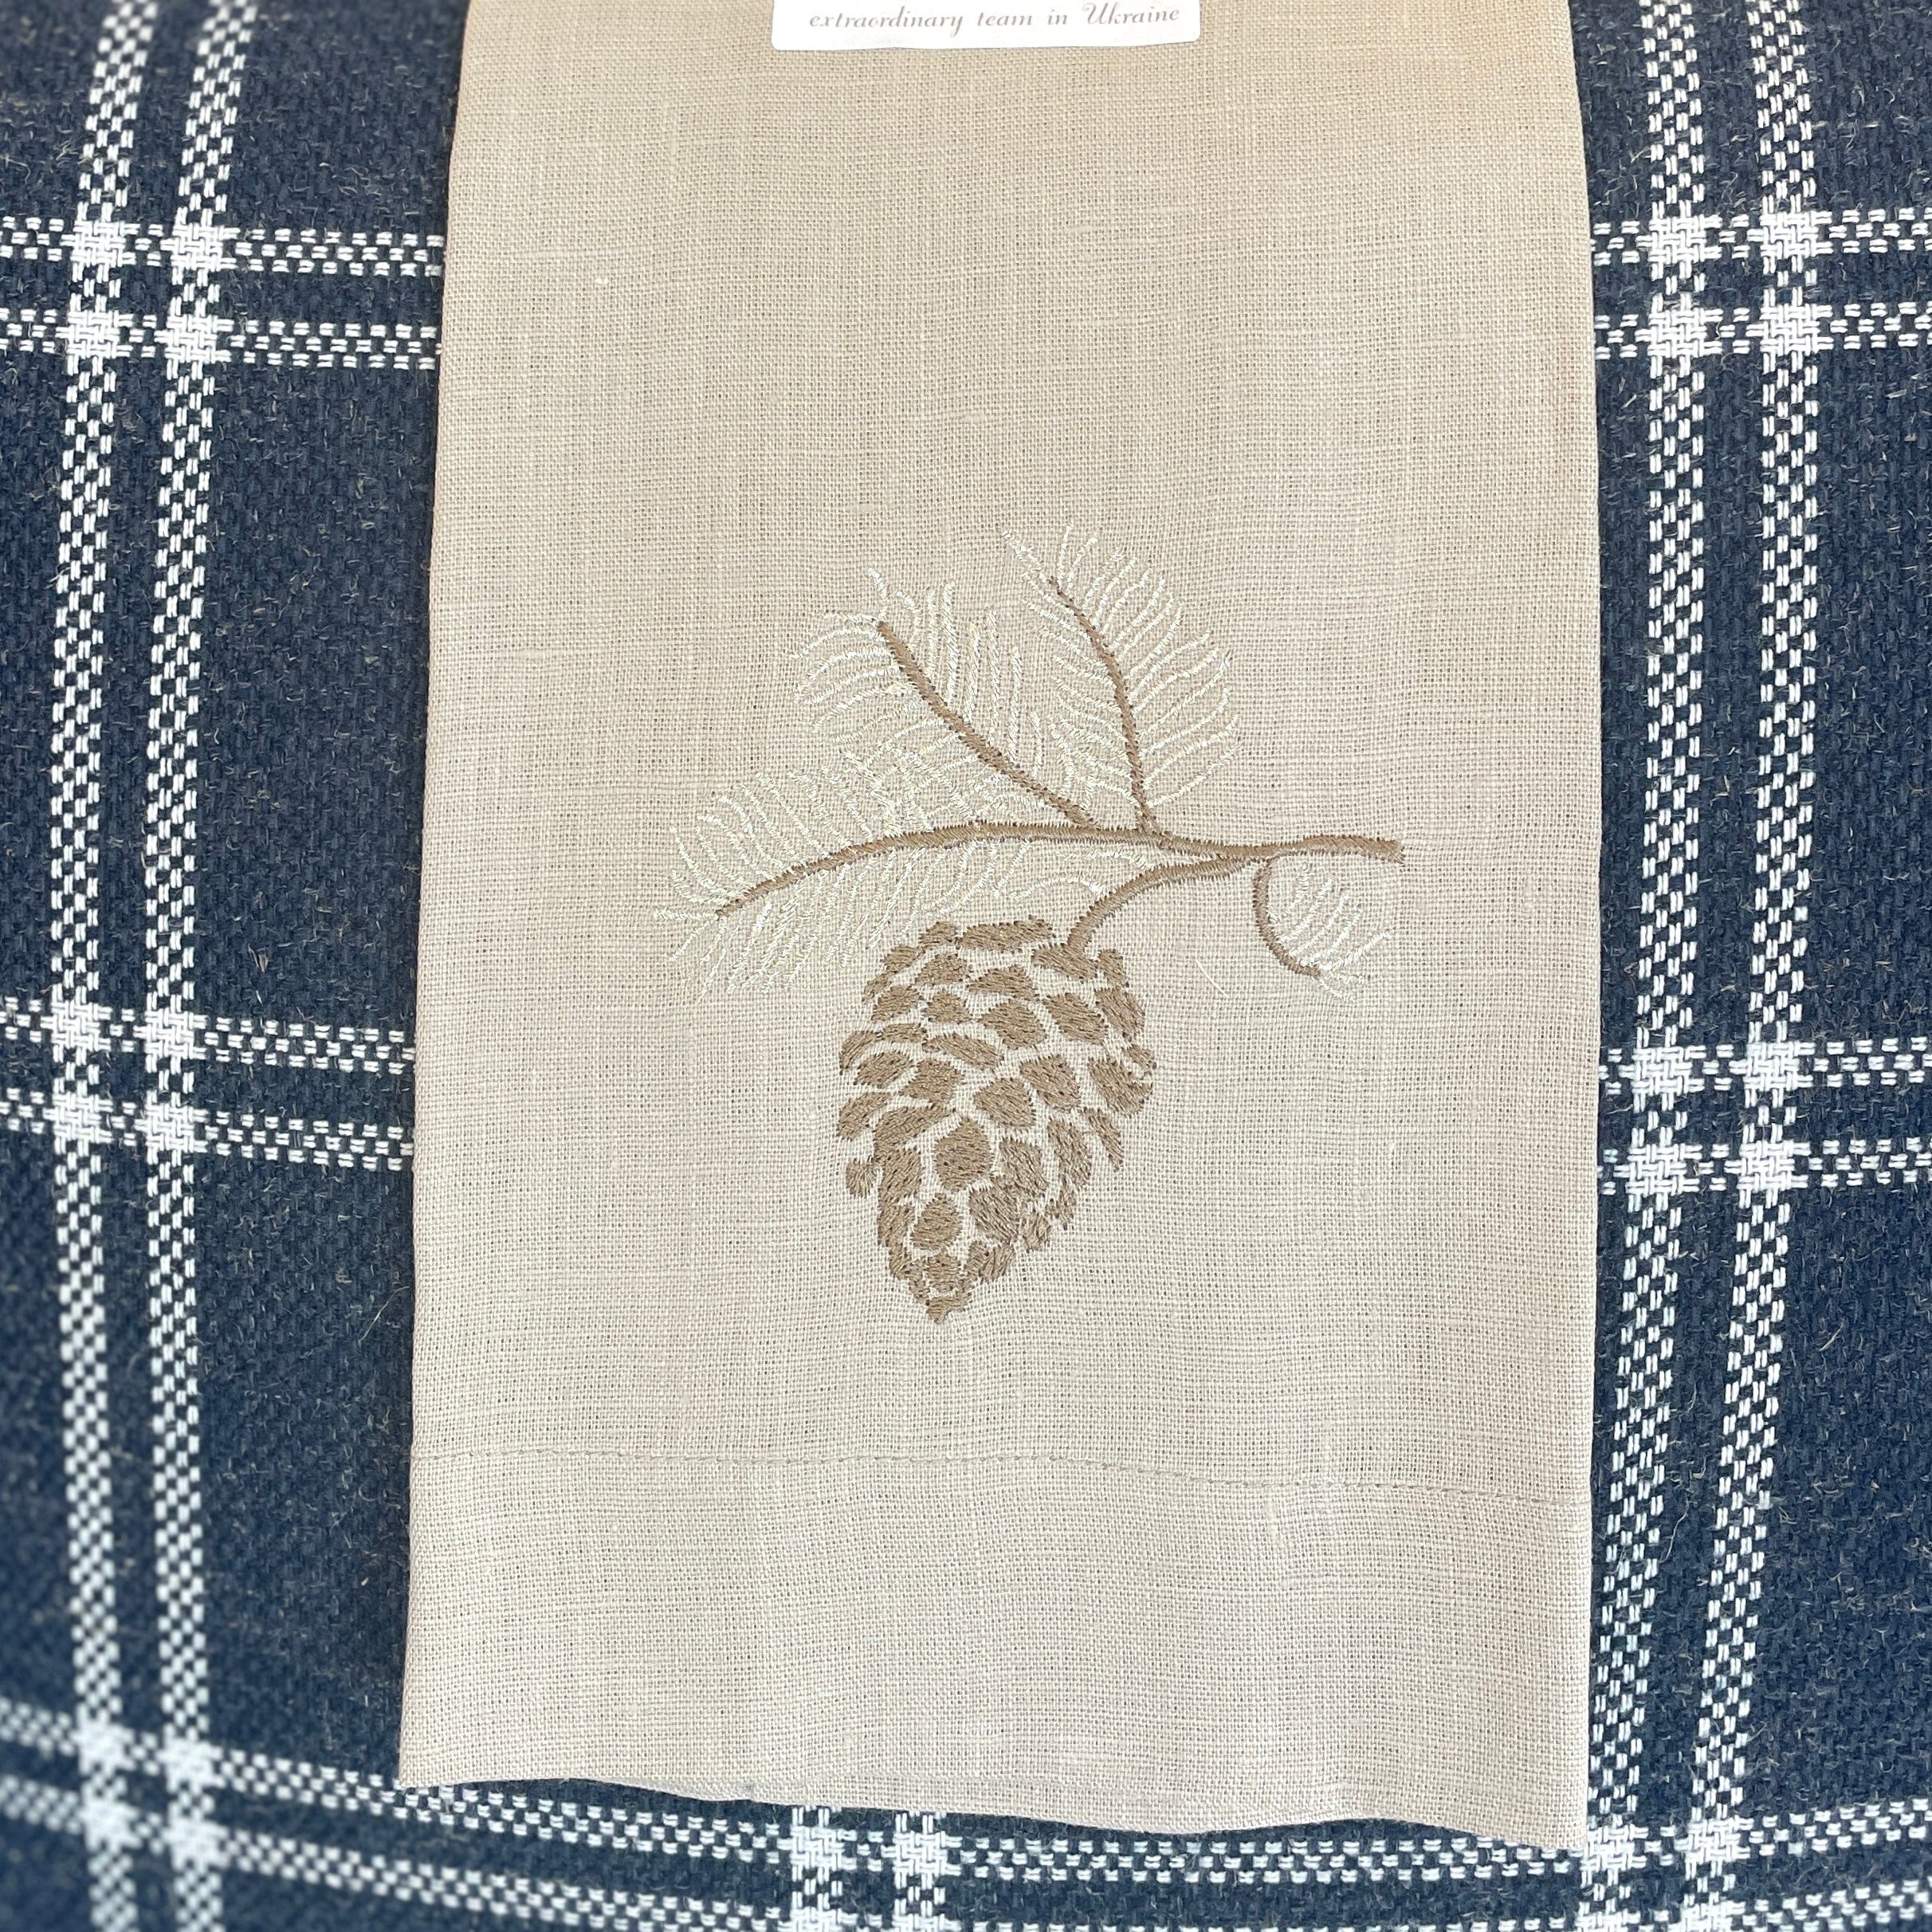 Pinecone/Flax Embroidered Linen Tea Towel - PORCH